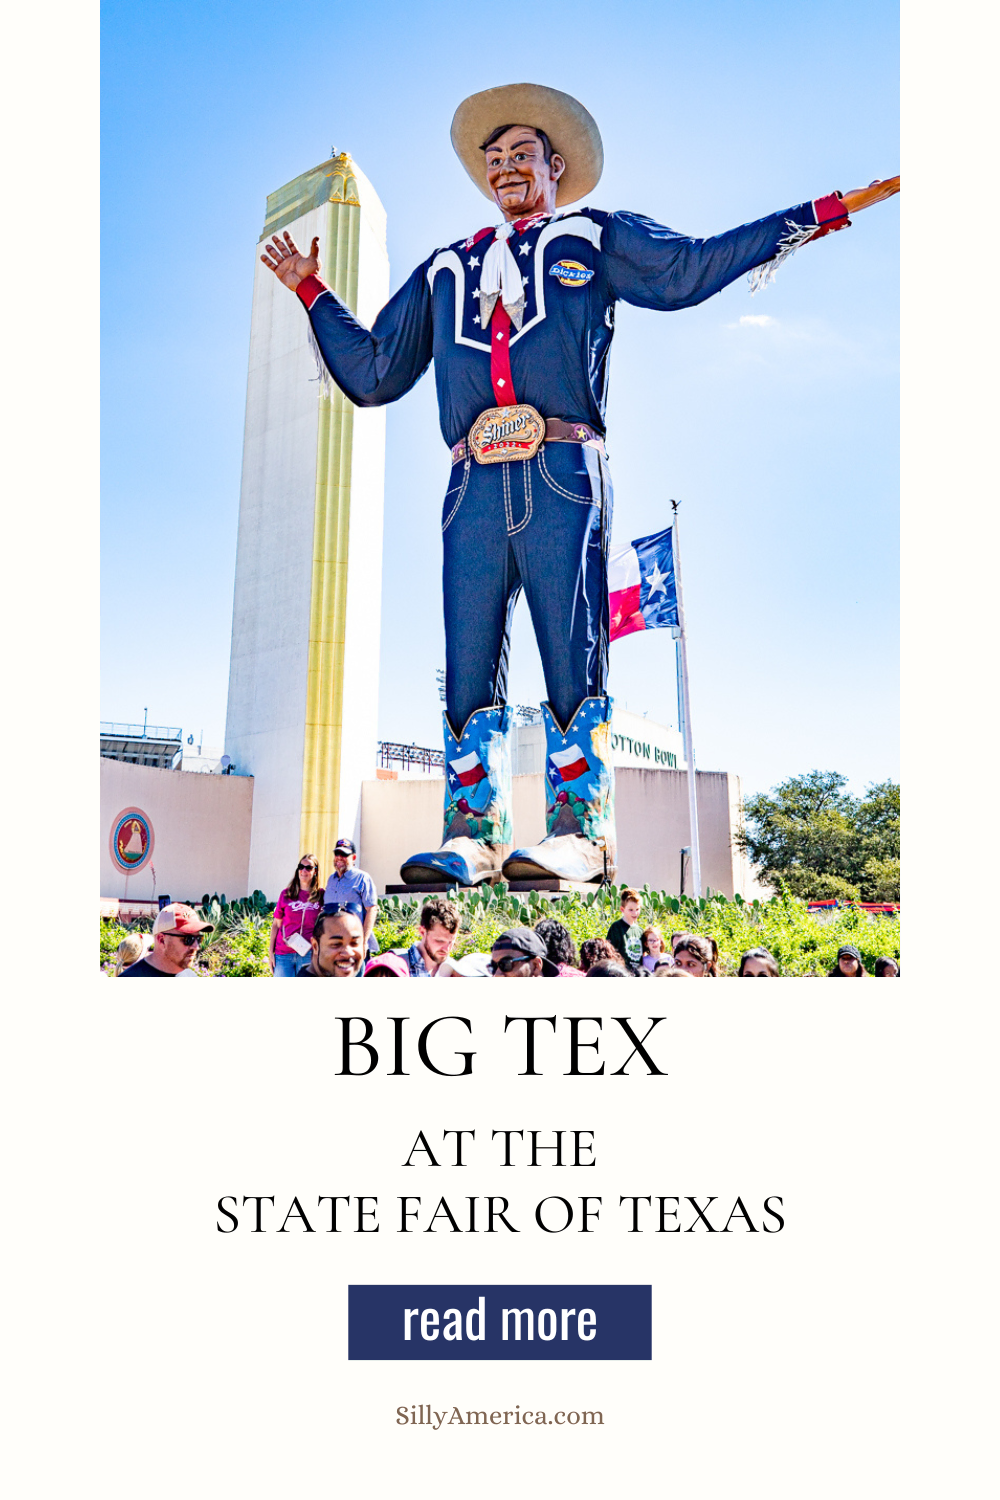 "Howdy, Folks!" This roadside attraction might just be the most recognizable man in Texas, which is saying a lot considering he only makes a brief appearance each year. Big Tex in Dallas, Texas is an icon and ambassador who has been delighting visitors to the State Fair of Texas since 1952. Visit this Texas roadside attraction on your Texas road trip to the state fair! #StateFair #RoadsideAttraction #StateFairOfTexas #Texas #TexasRoadsideAttraction #RoadTrip